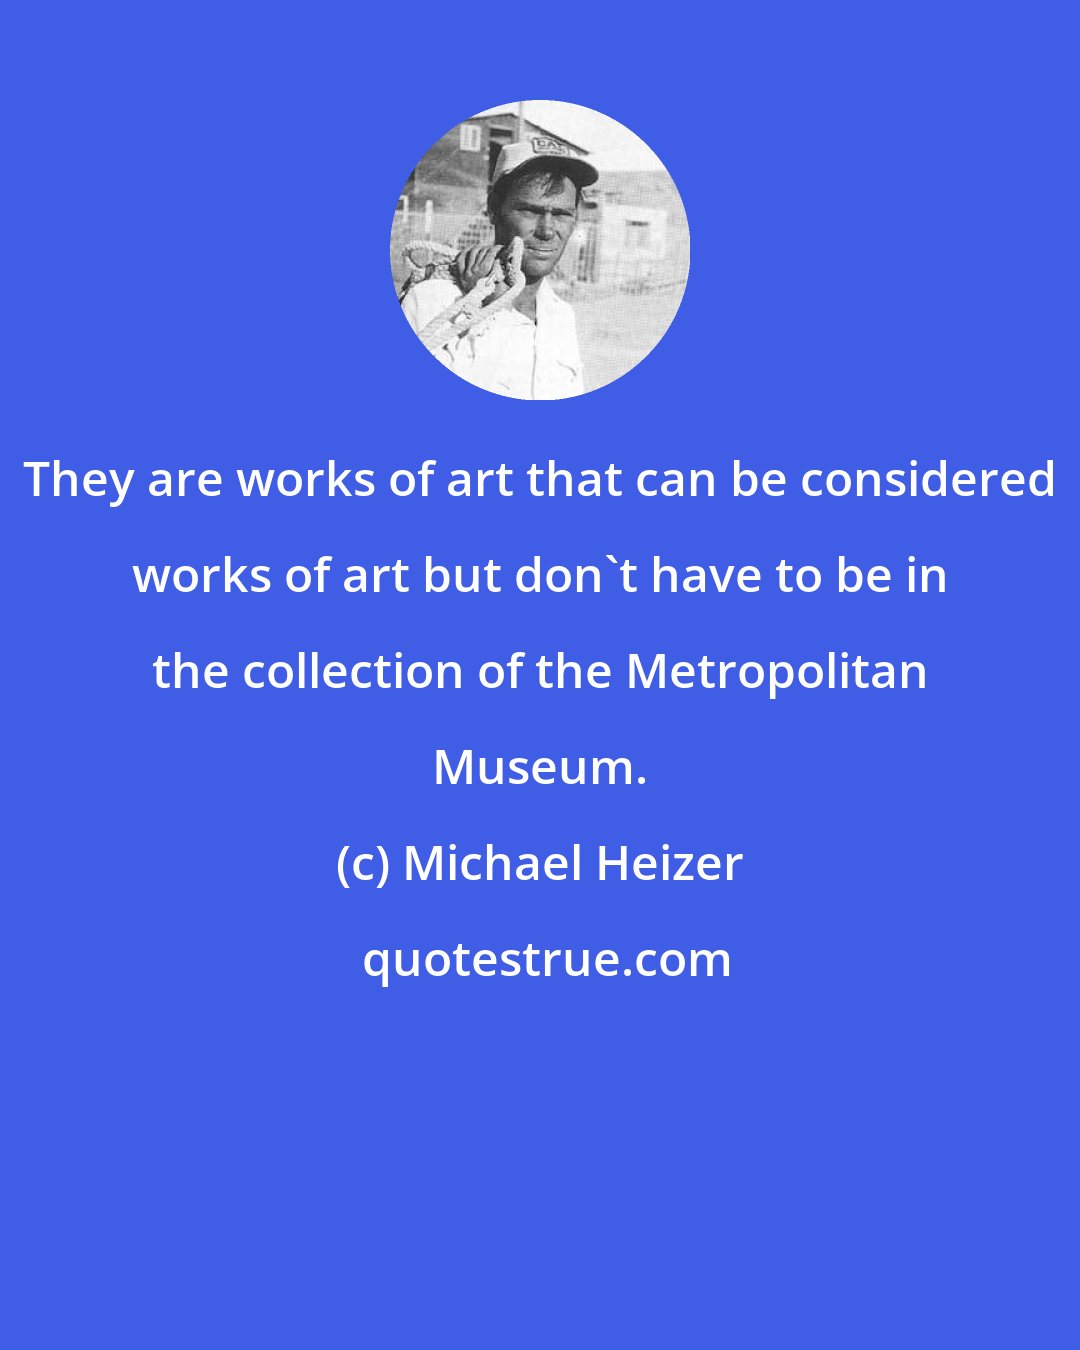 Michael Heizer: They are works of art that can be considered works of art but don't have to be in the collection of the Metropolitan Museum.